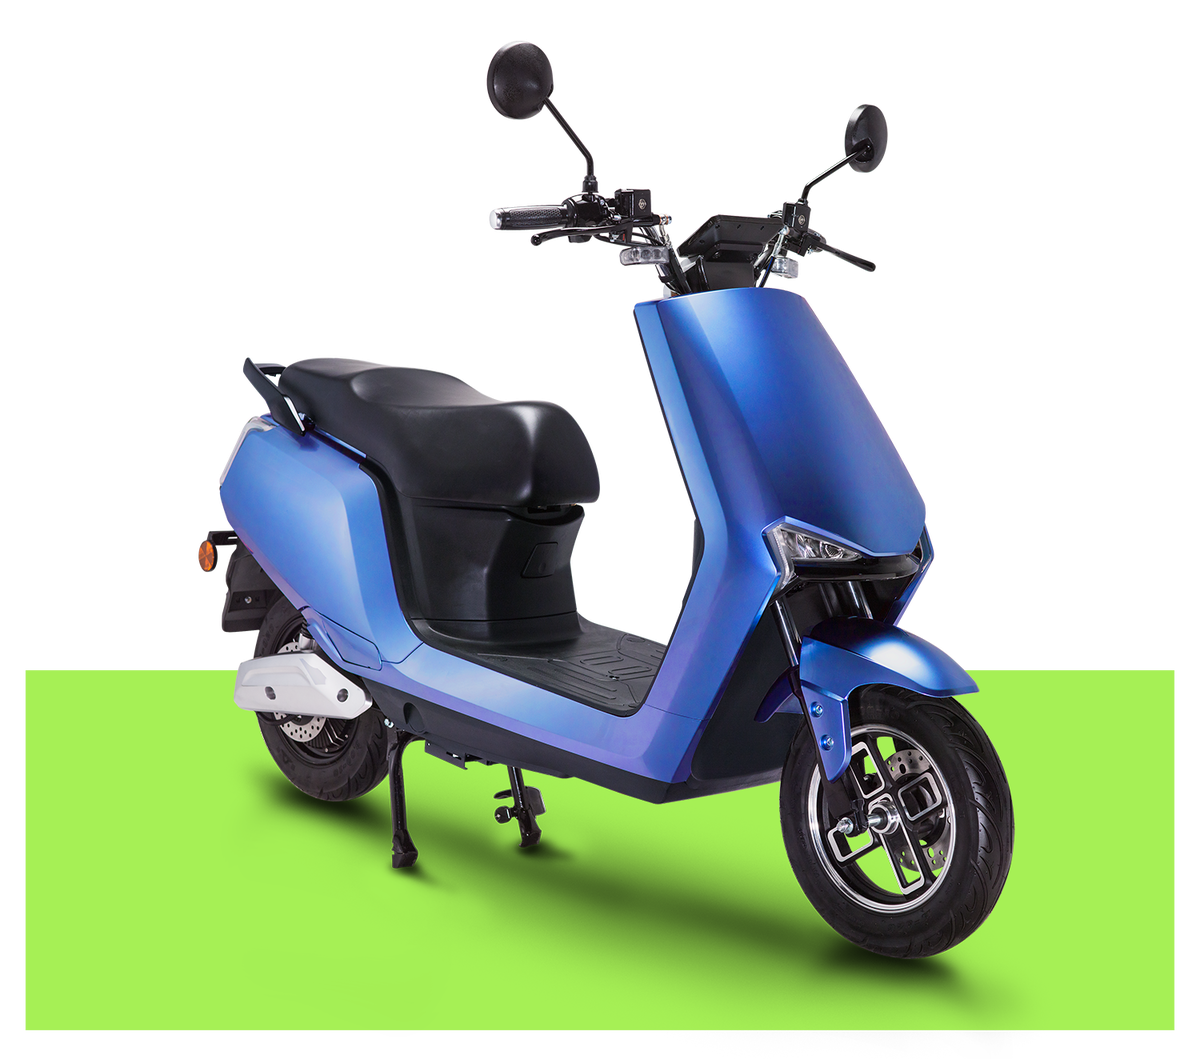 https://e-vehicleinfo.com/bgauss-a2-low-speed-electric-scooter-price-range-features/